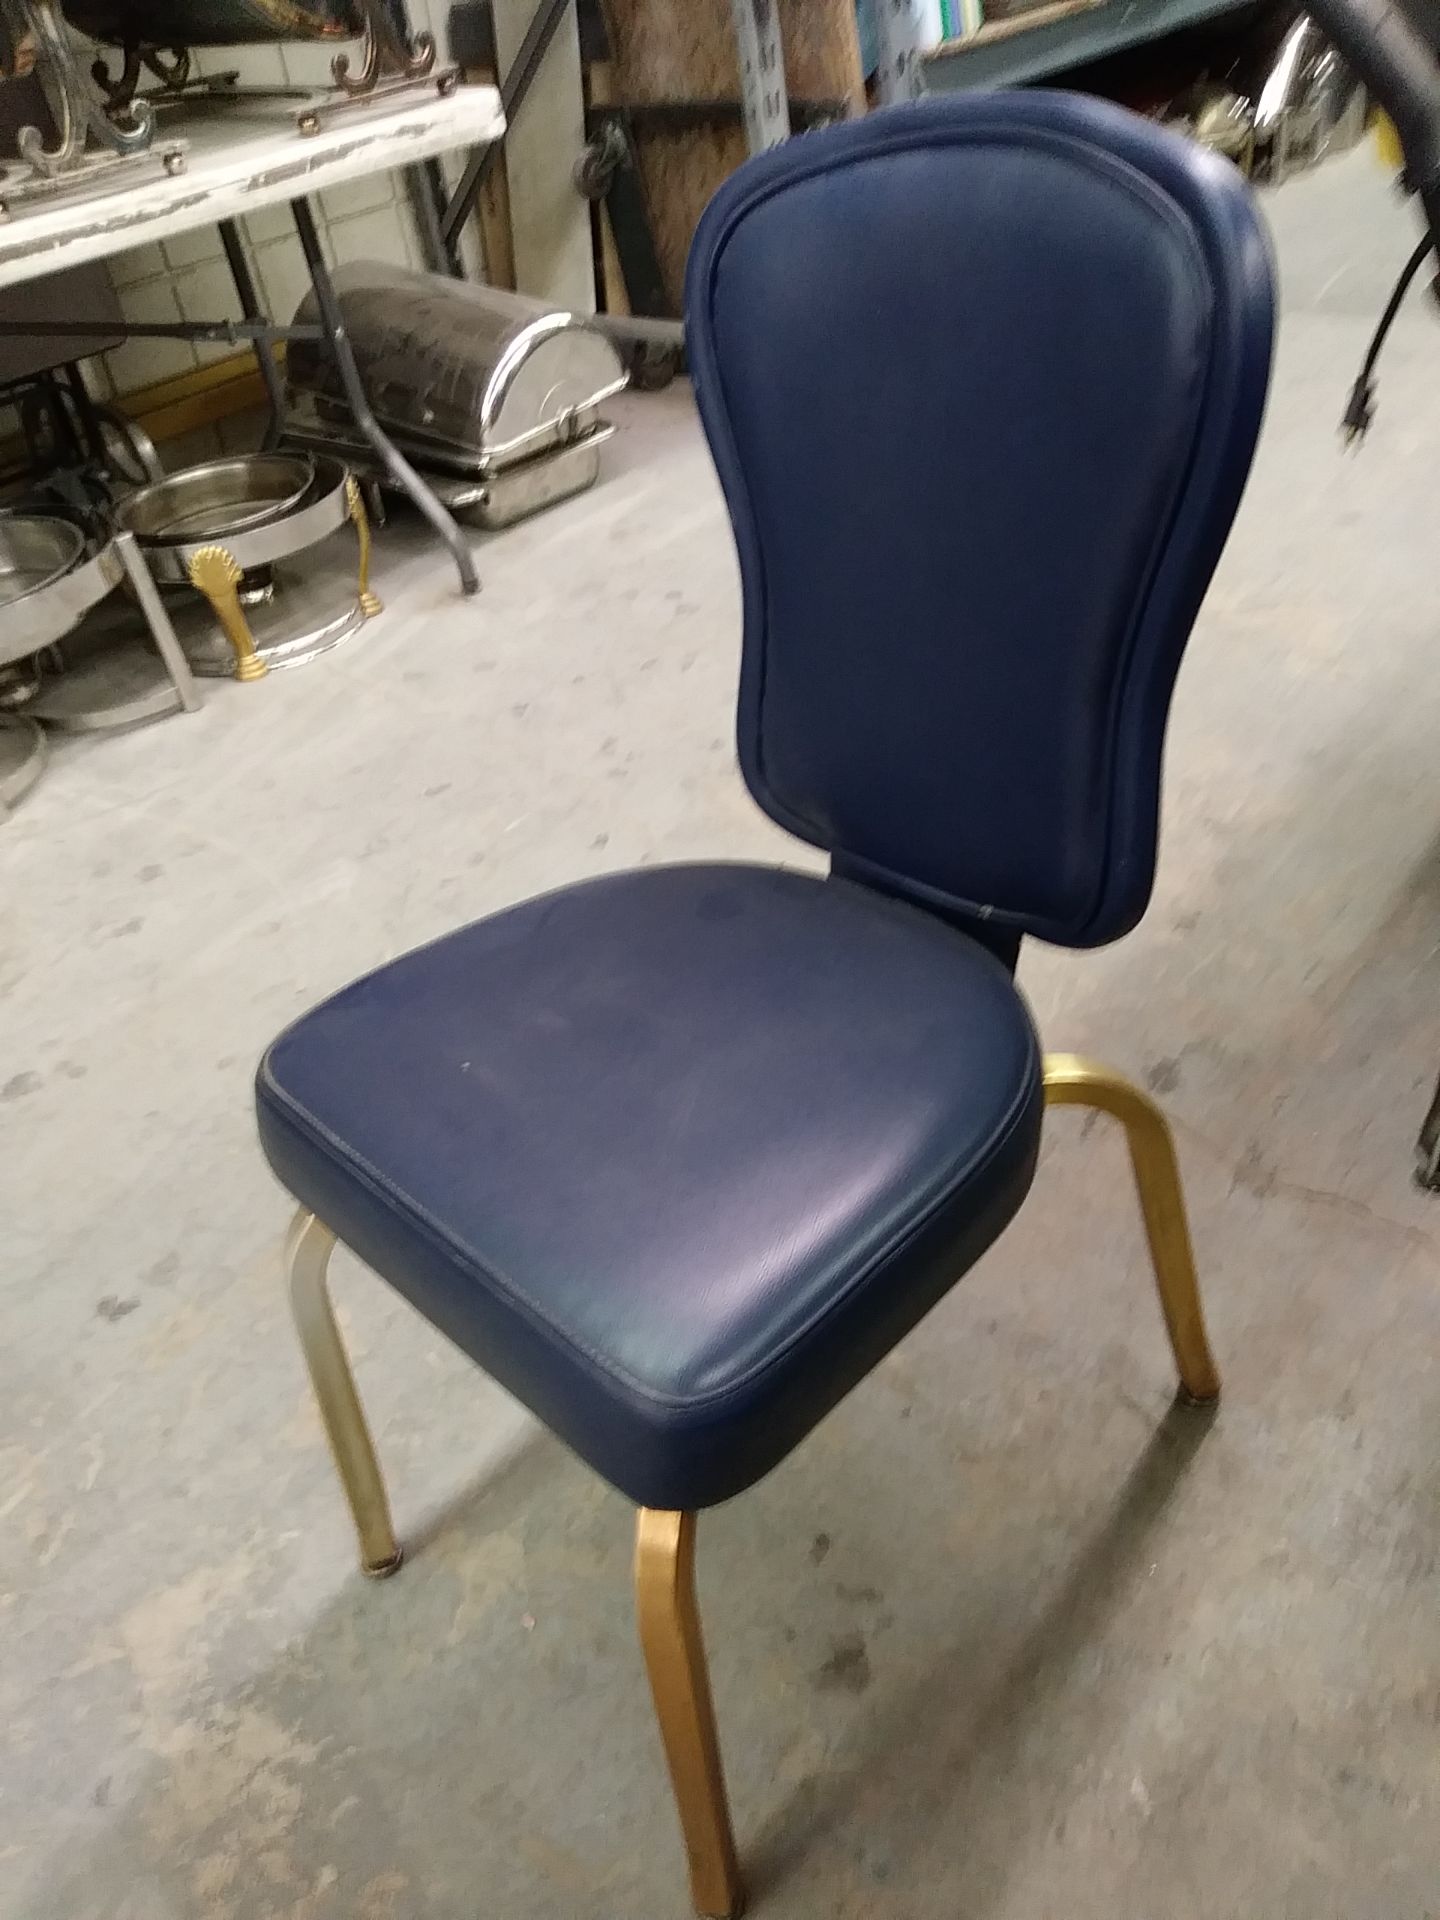 BLUE LEATHER / METAL FRAME RESTAURANT DINING CHAIRS (QTY X MONEY) - Image 3 of 5